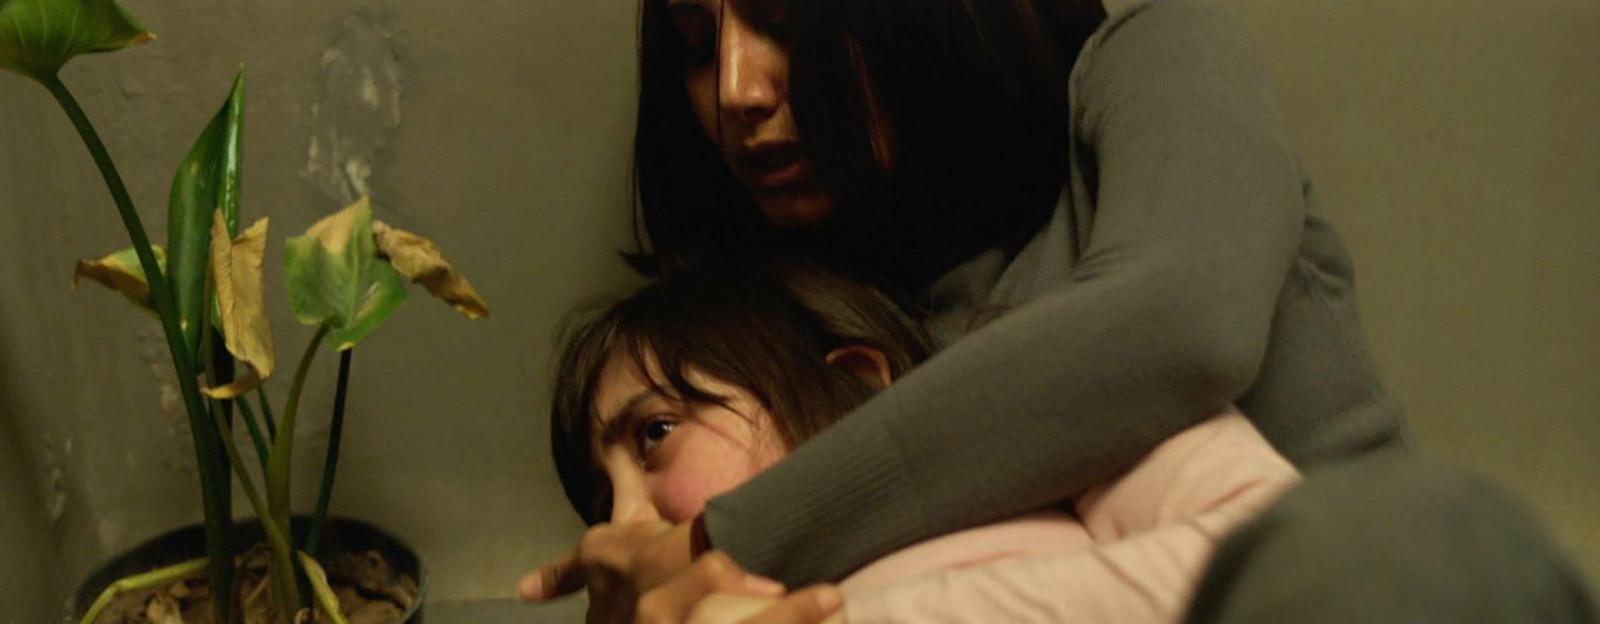 Under the Shadow - Il Diavolo nell'Ombra - Blu-ray (Blu-ray) Image 2